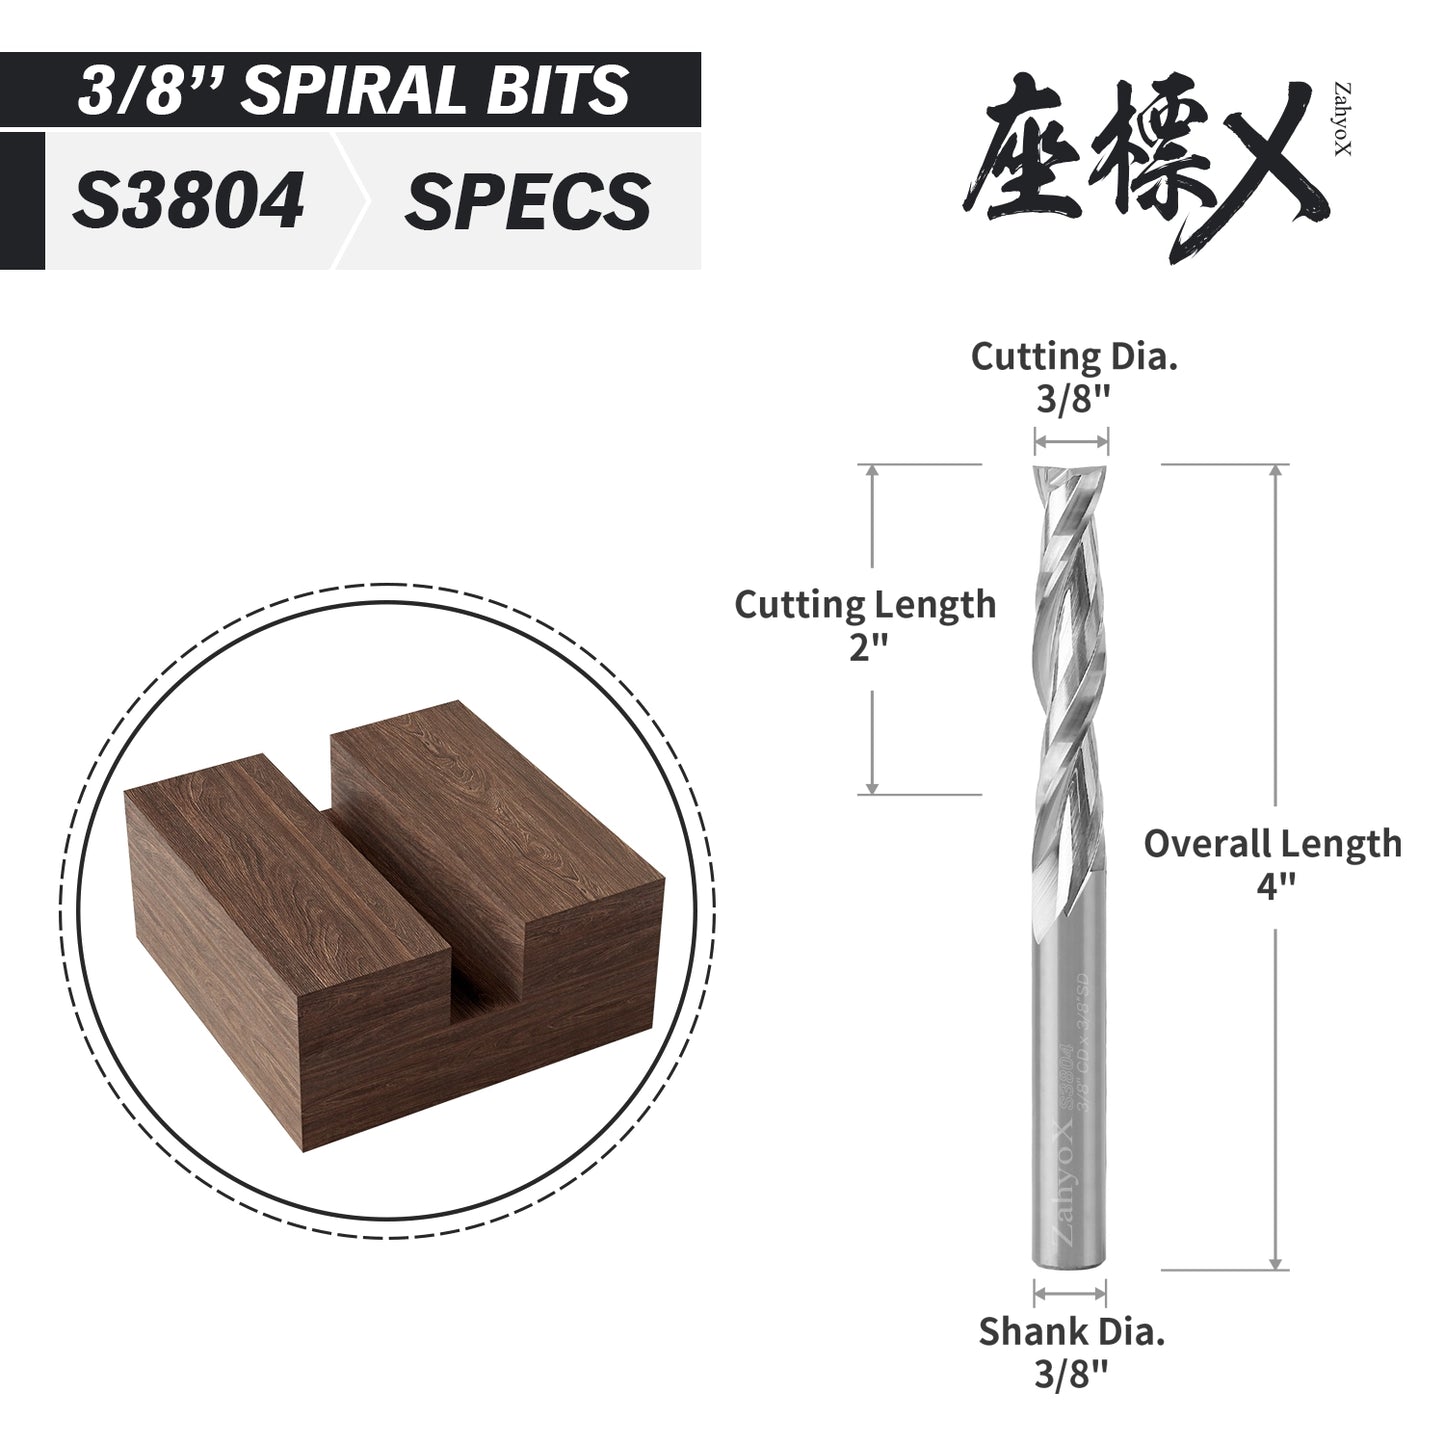 S3804 Solid Carbide Upcut CNC Spiral Router Bit - 2Flutes - 3/8 SD - 3/8 CD - 2 CL - 4 OL